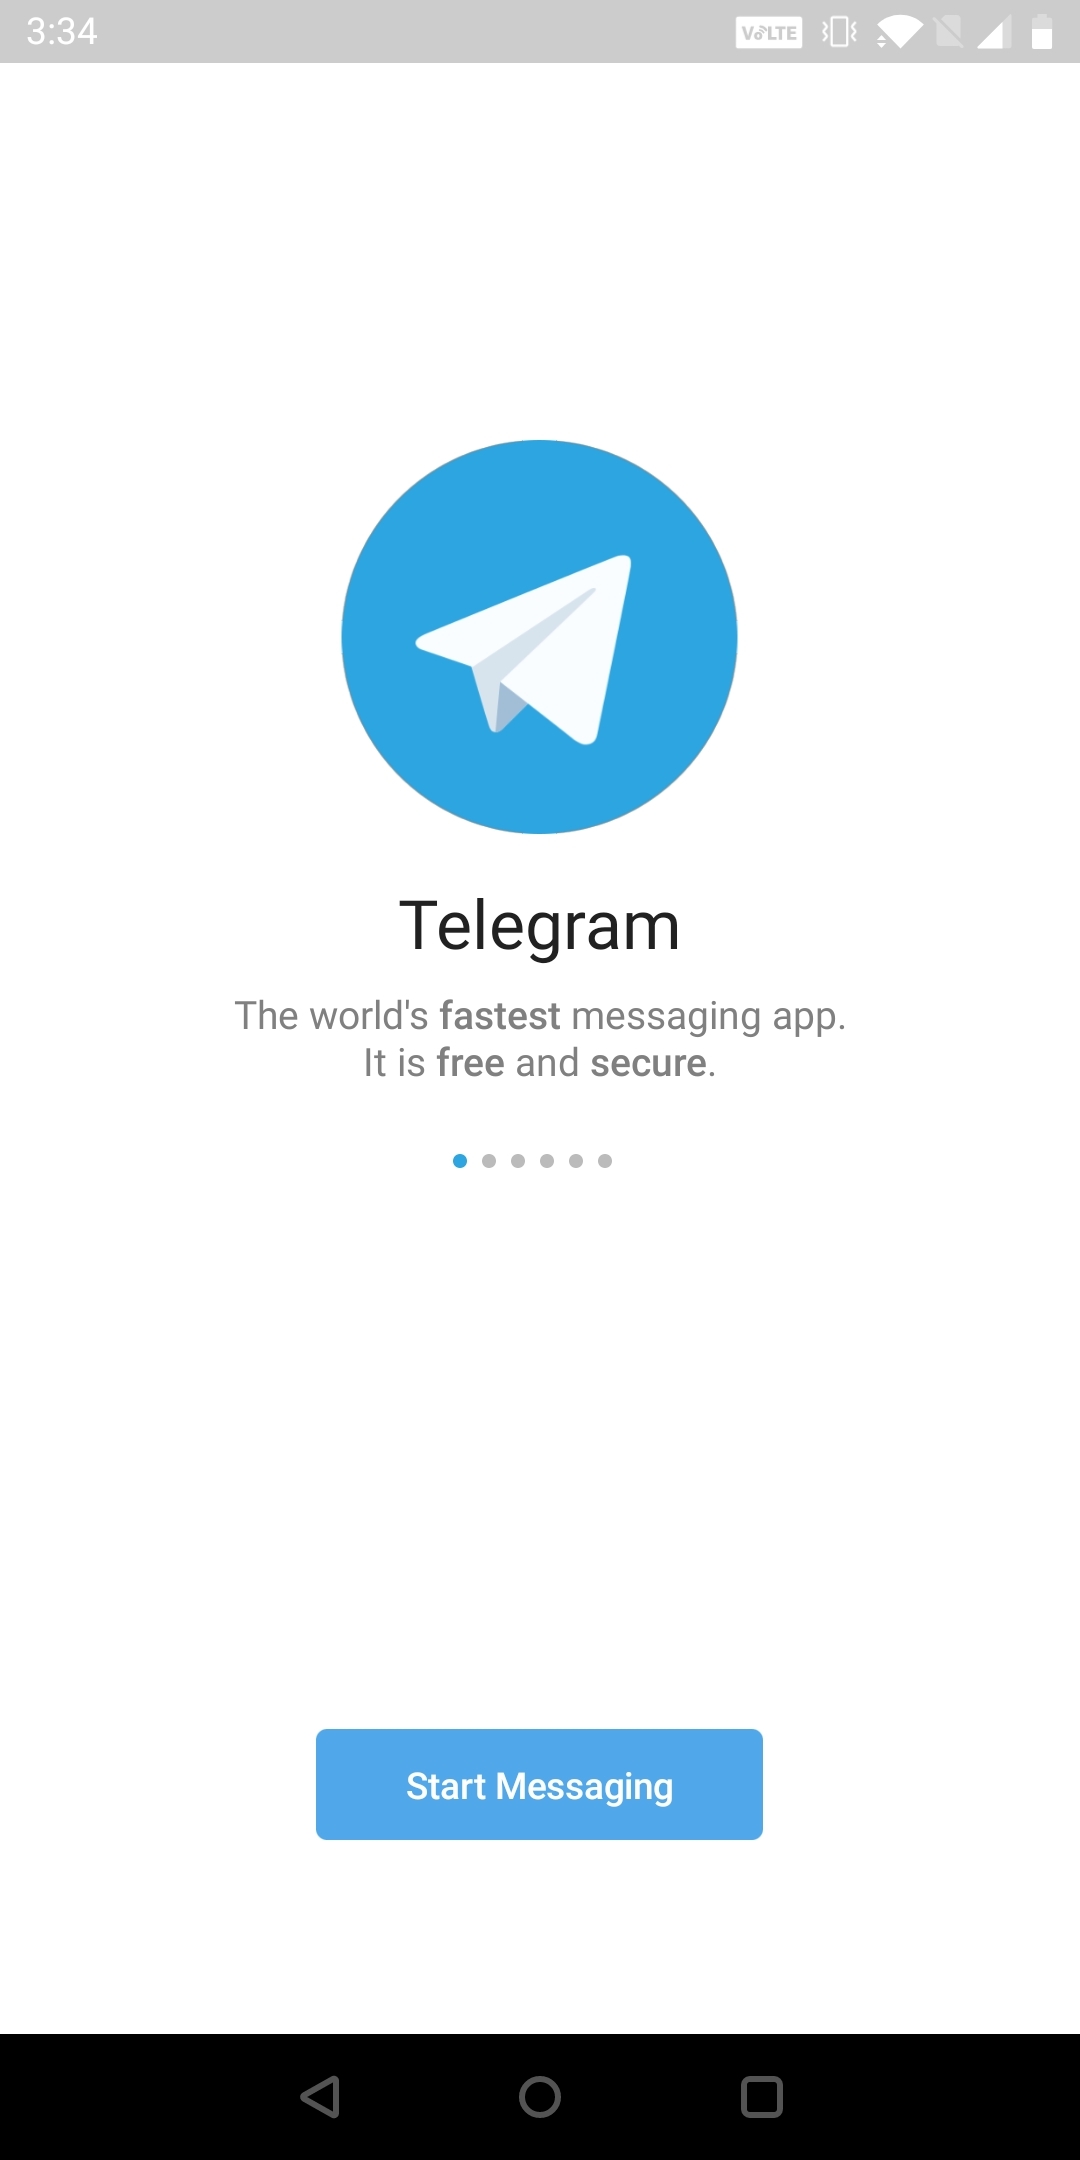 How to enable auto-delete feature on Telegram